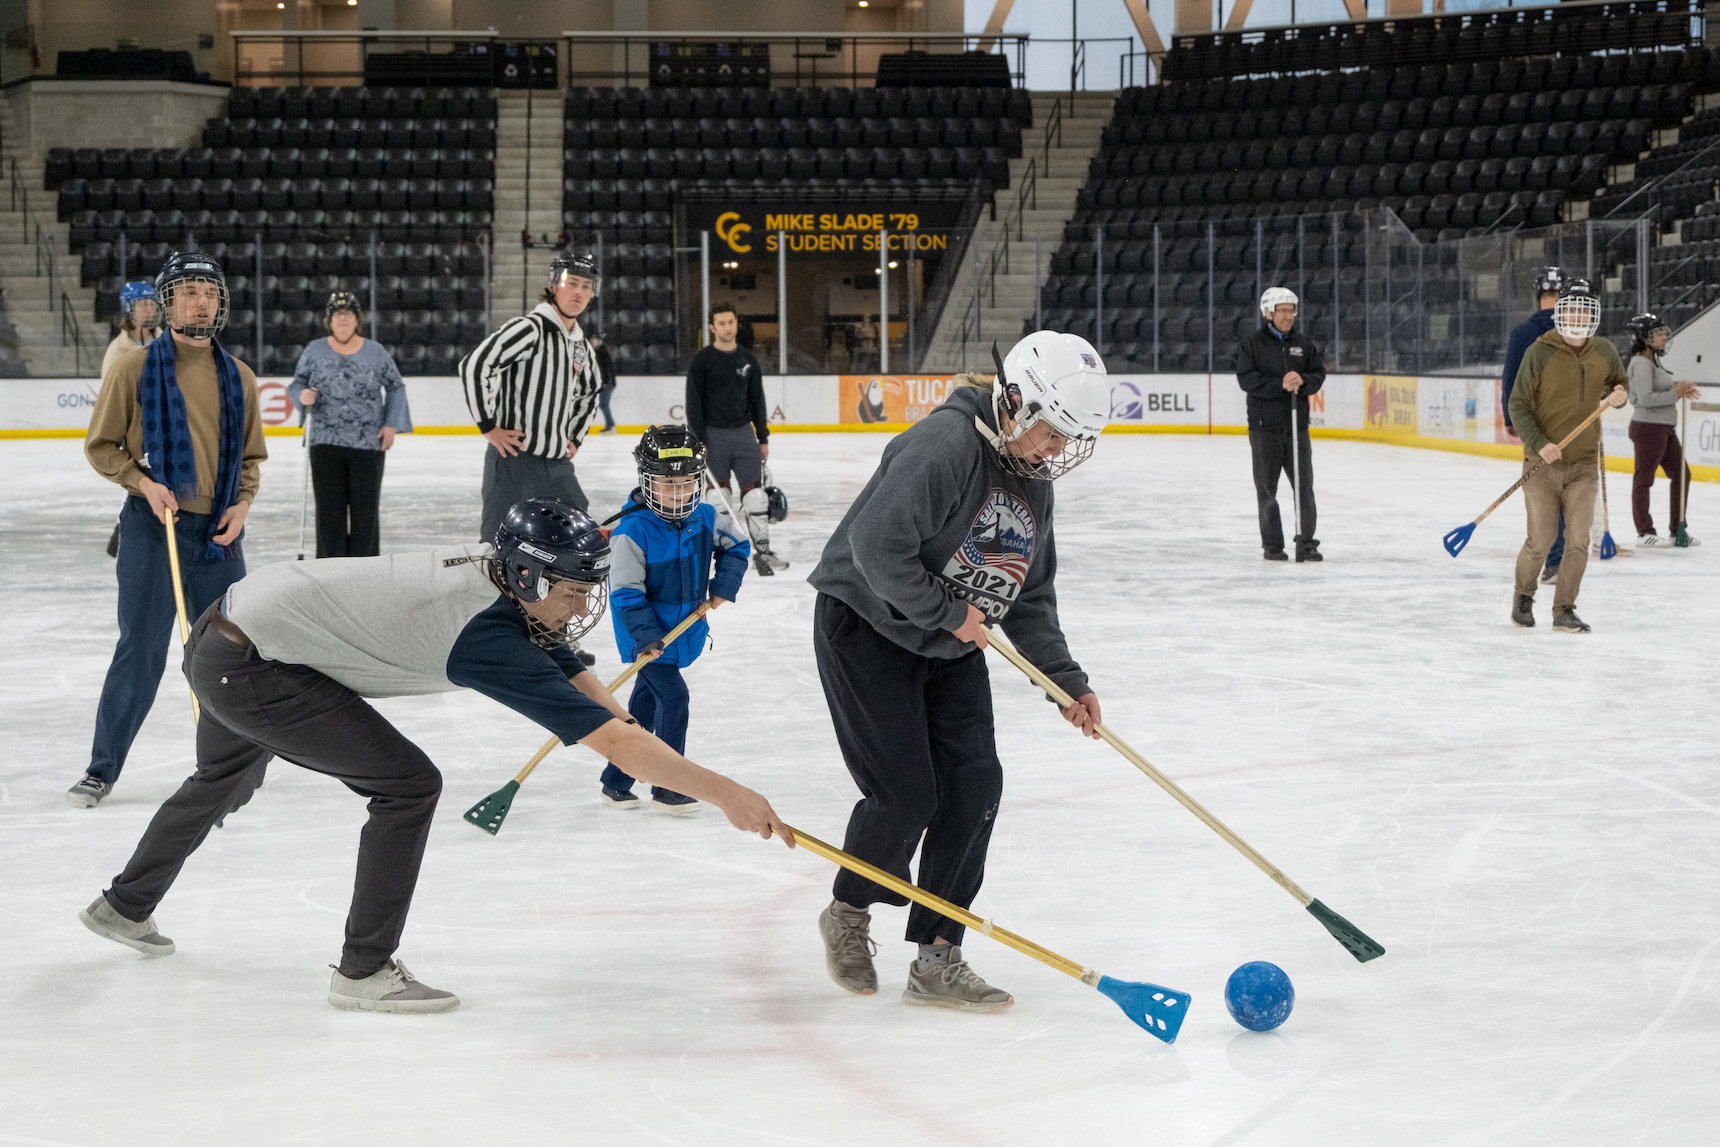 The physics faculty, their families, and students enjoy a friendly match of broomball at Robson Arena.